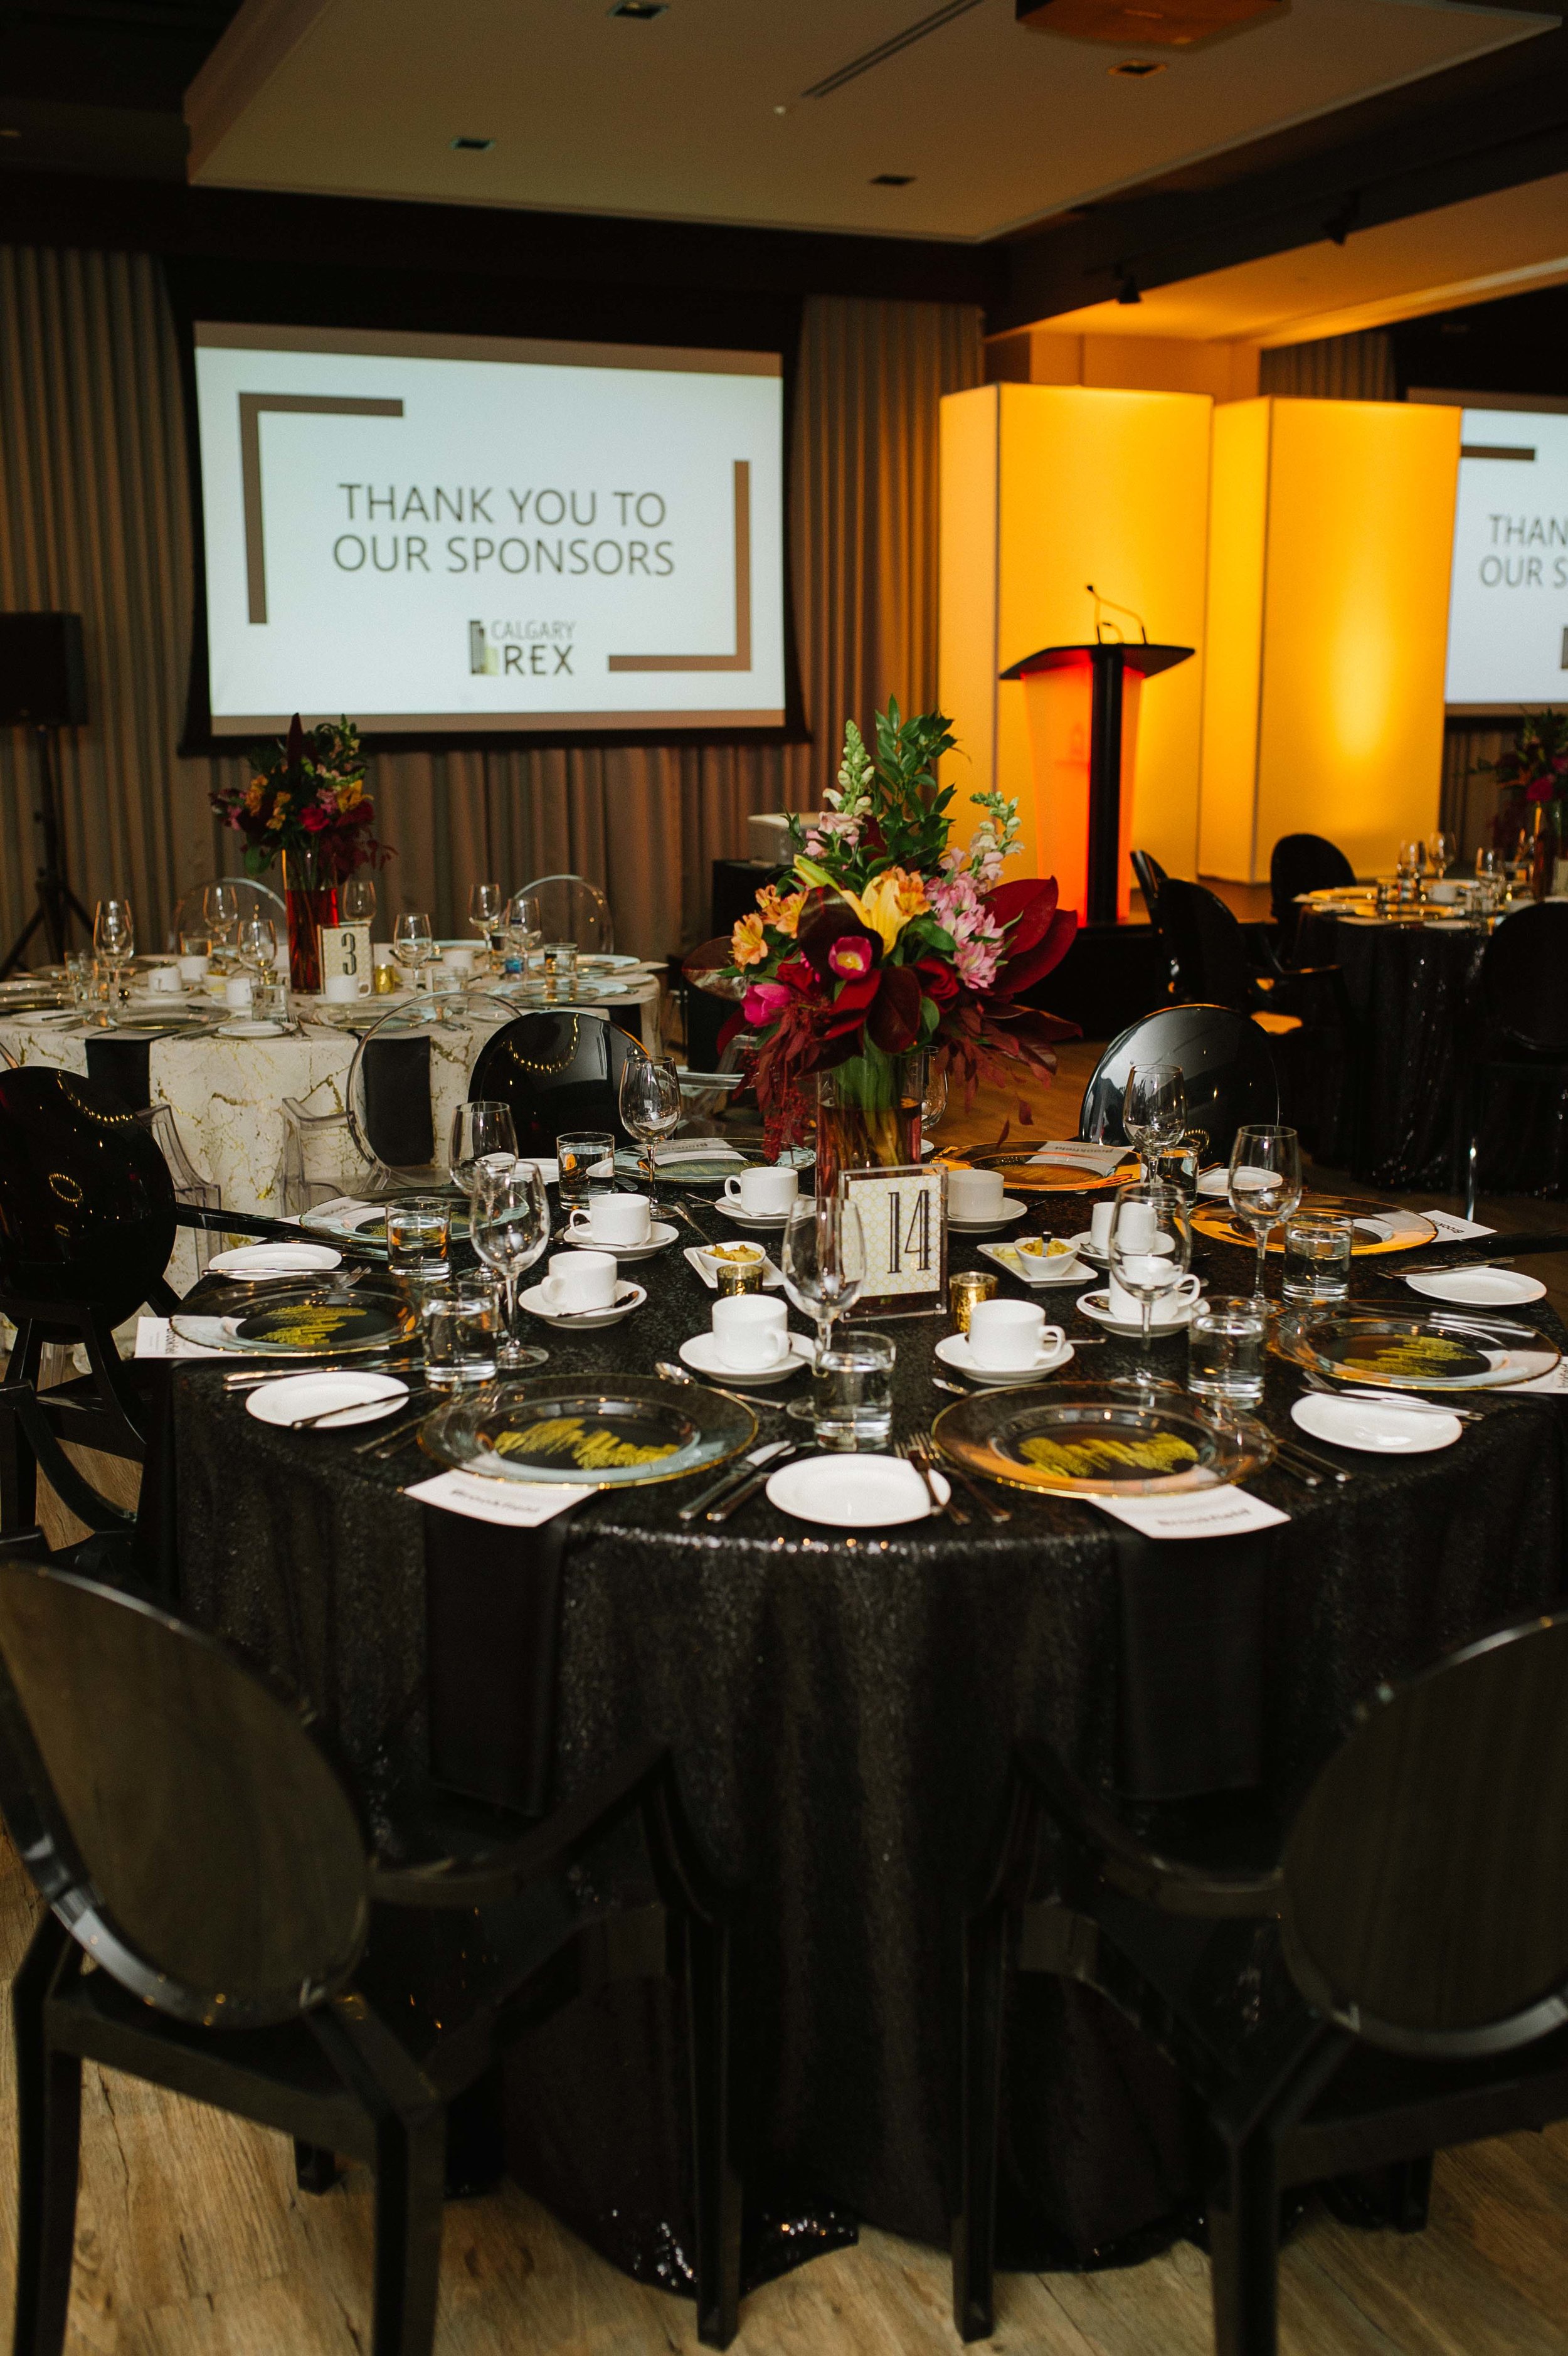 Christy-D-Swanberg-Photography-Calgary-Commercial-Corporate-Events-REX-Awards-08.jpg